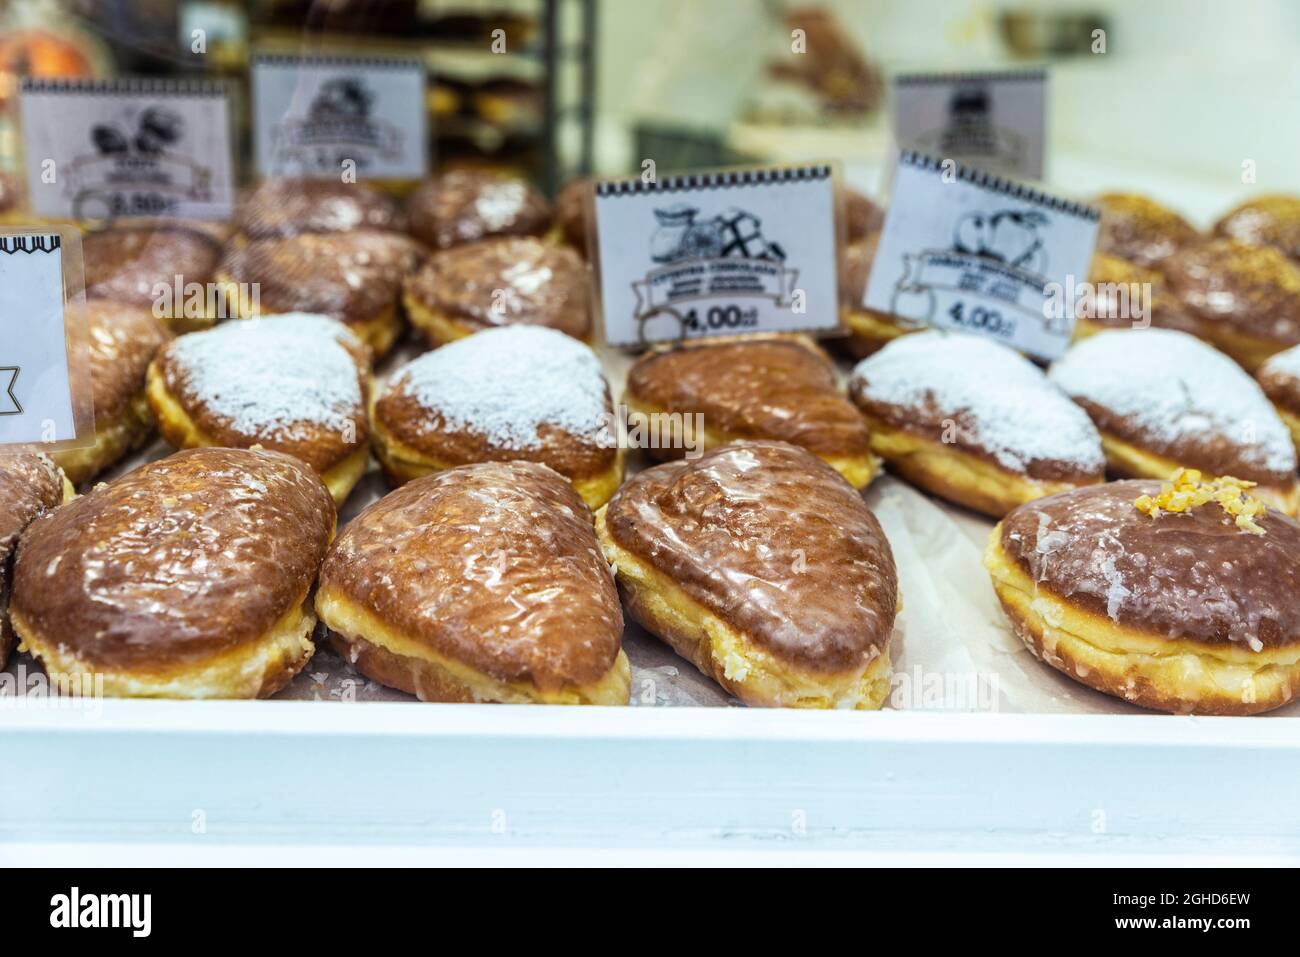 Krakow, Poland - August 28, 2018: Assortment of traditional Paczki in a pastry shop in the historical center of Krakow, Poland Stock Photo